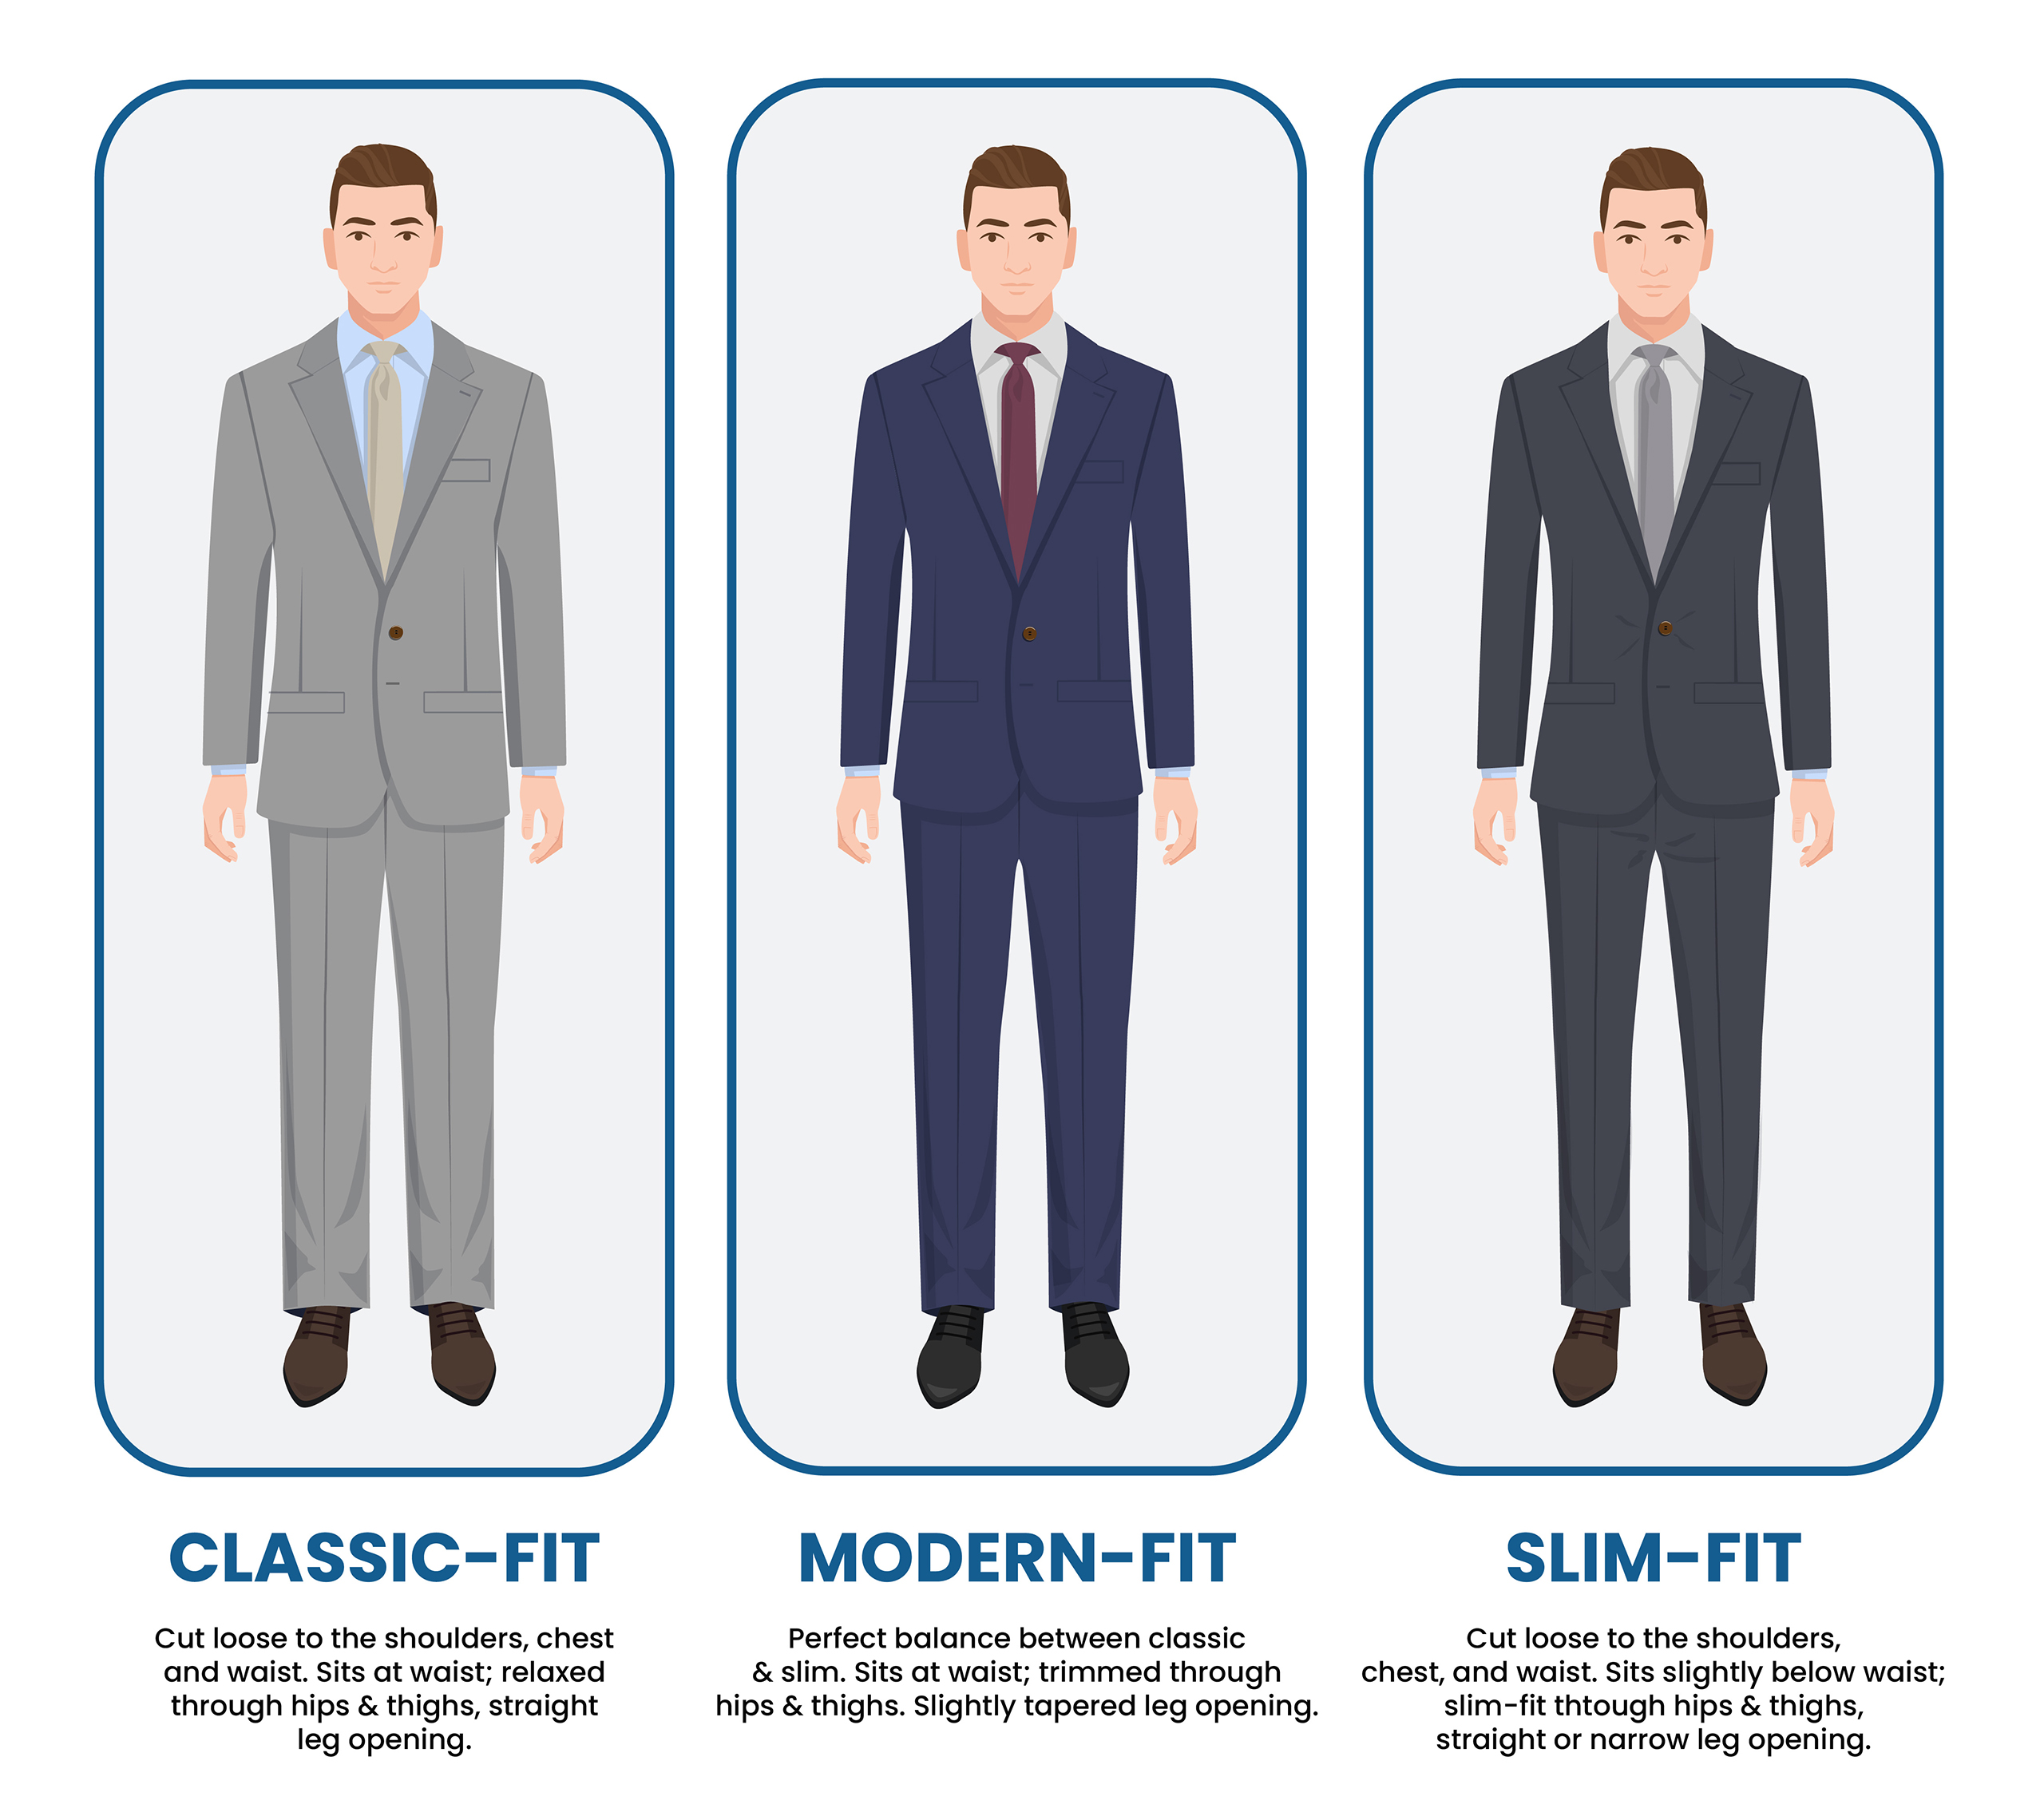 Skinny Fit vs Slim Fit - What's The Difference?